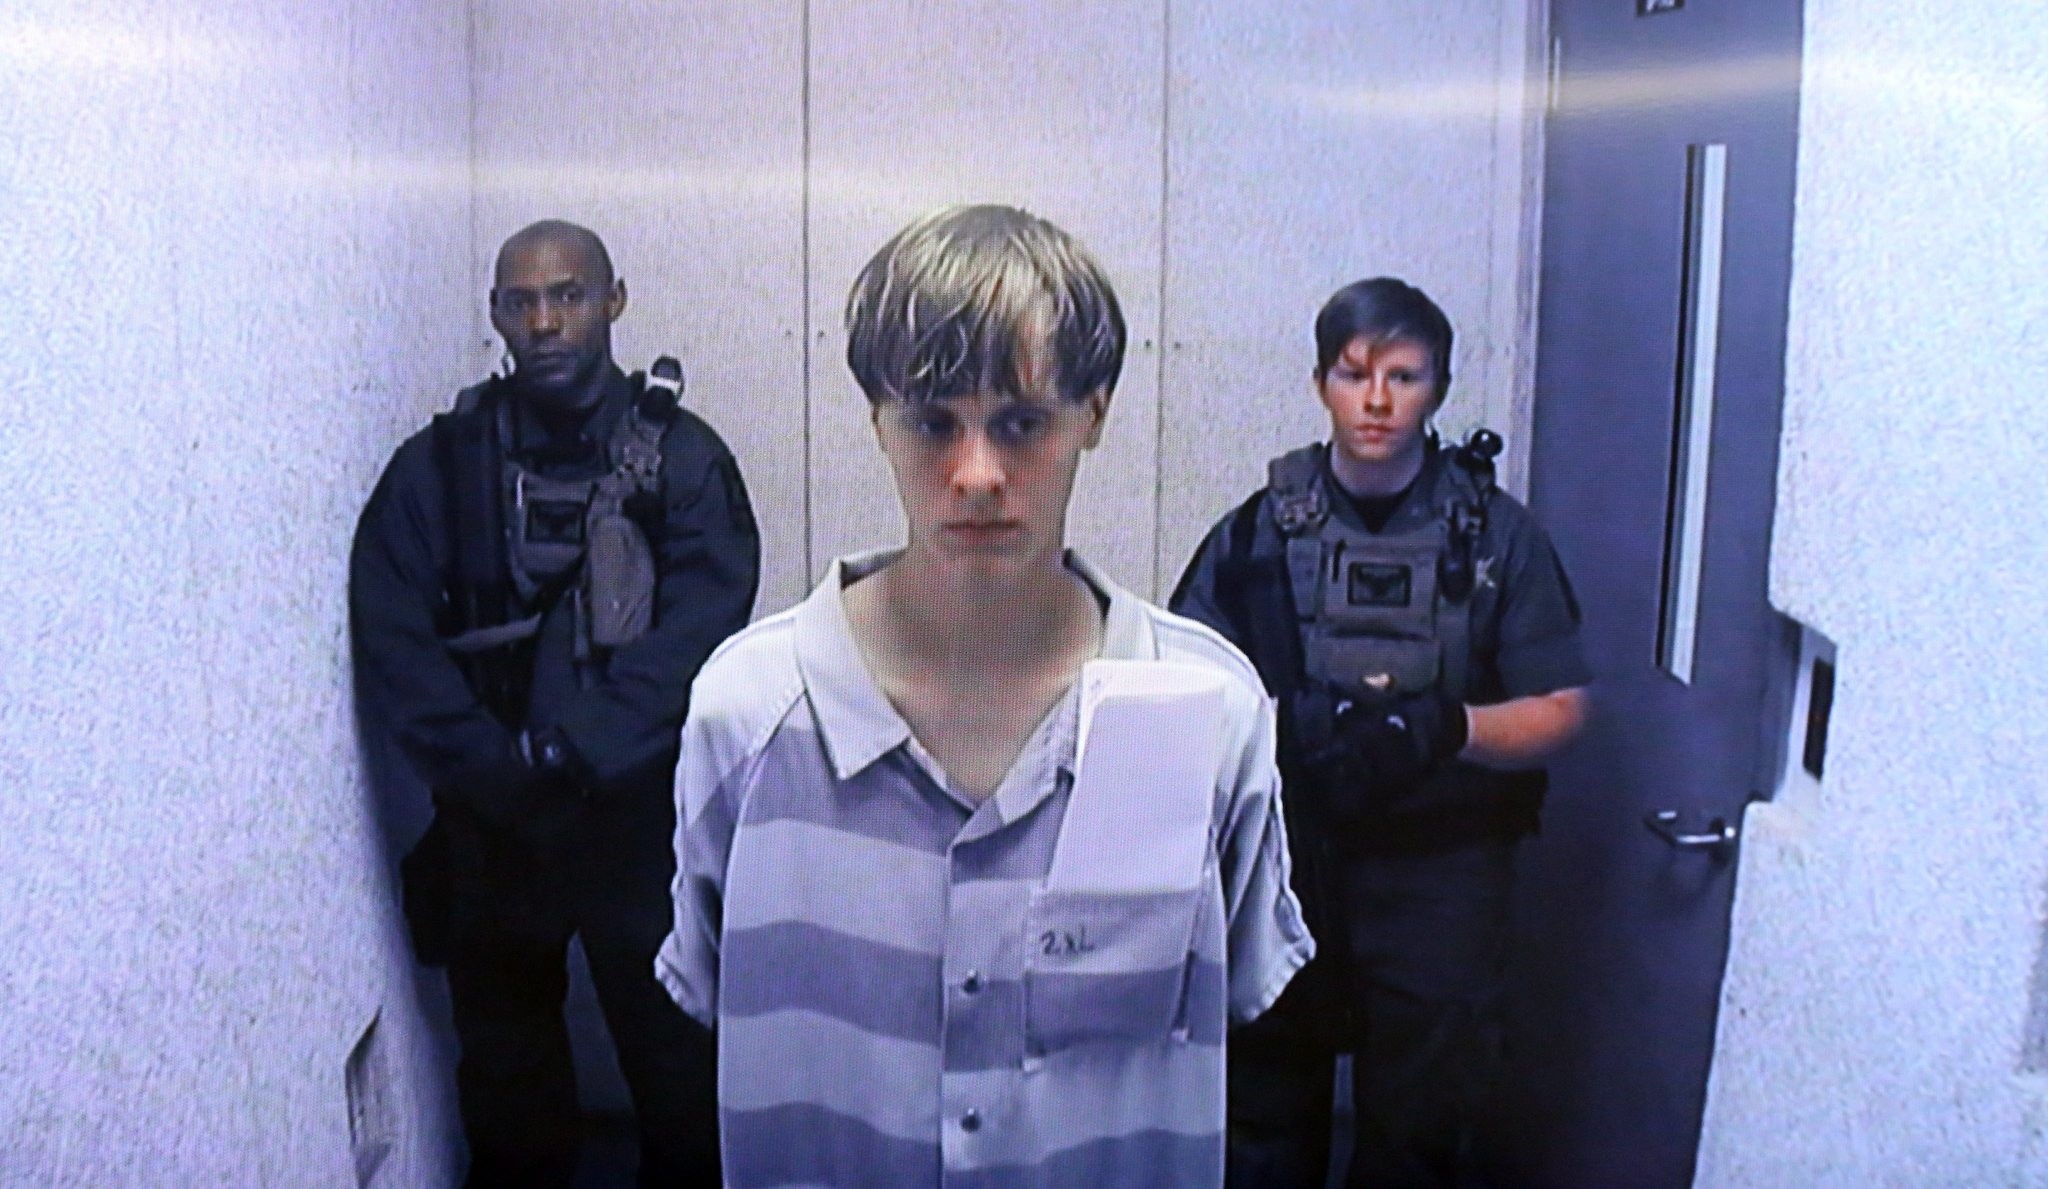  A file picture dated 19 June 2015 shows suspect Dylann Roof (C) appearing via video link at a bond hearing in court in North Charleston. (EPA Photo)